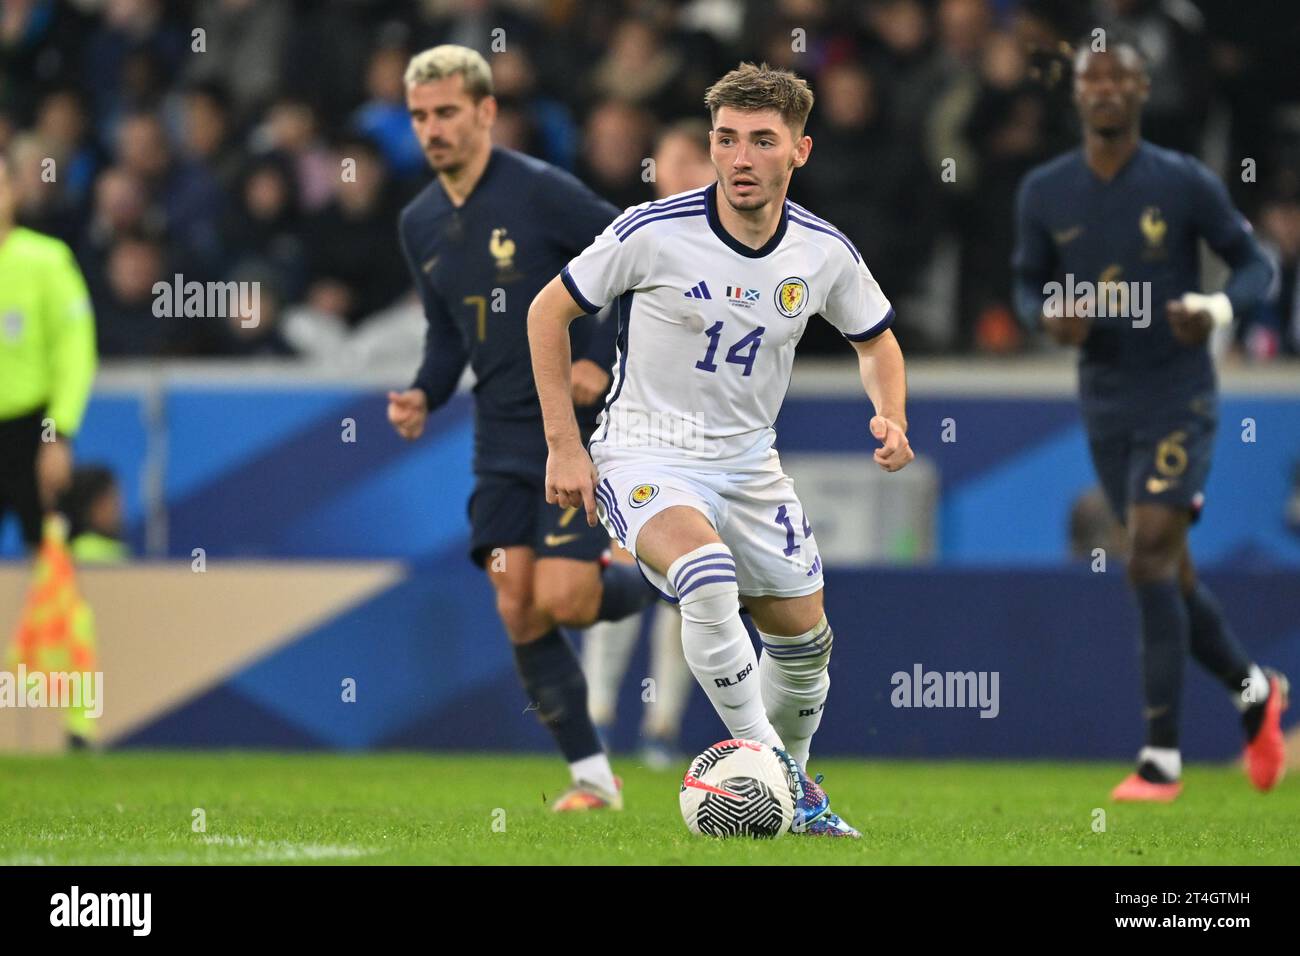 Billy Gilmour (14) of Scotland pictured during a soccer game between the national teams of France and Scotland in friendly game, on October 17 , 2023 in Lille, France. (Photo by David Catry / Sportpix) Stock Photo